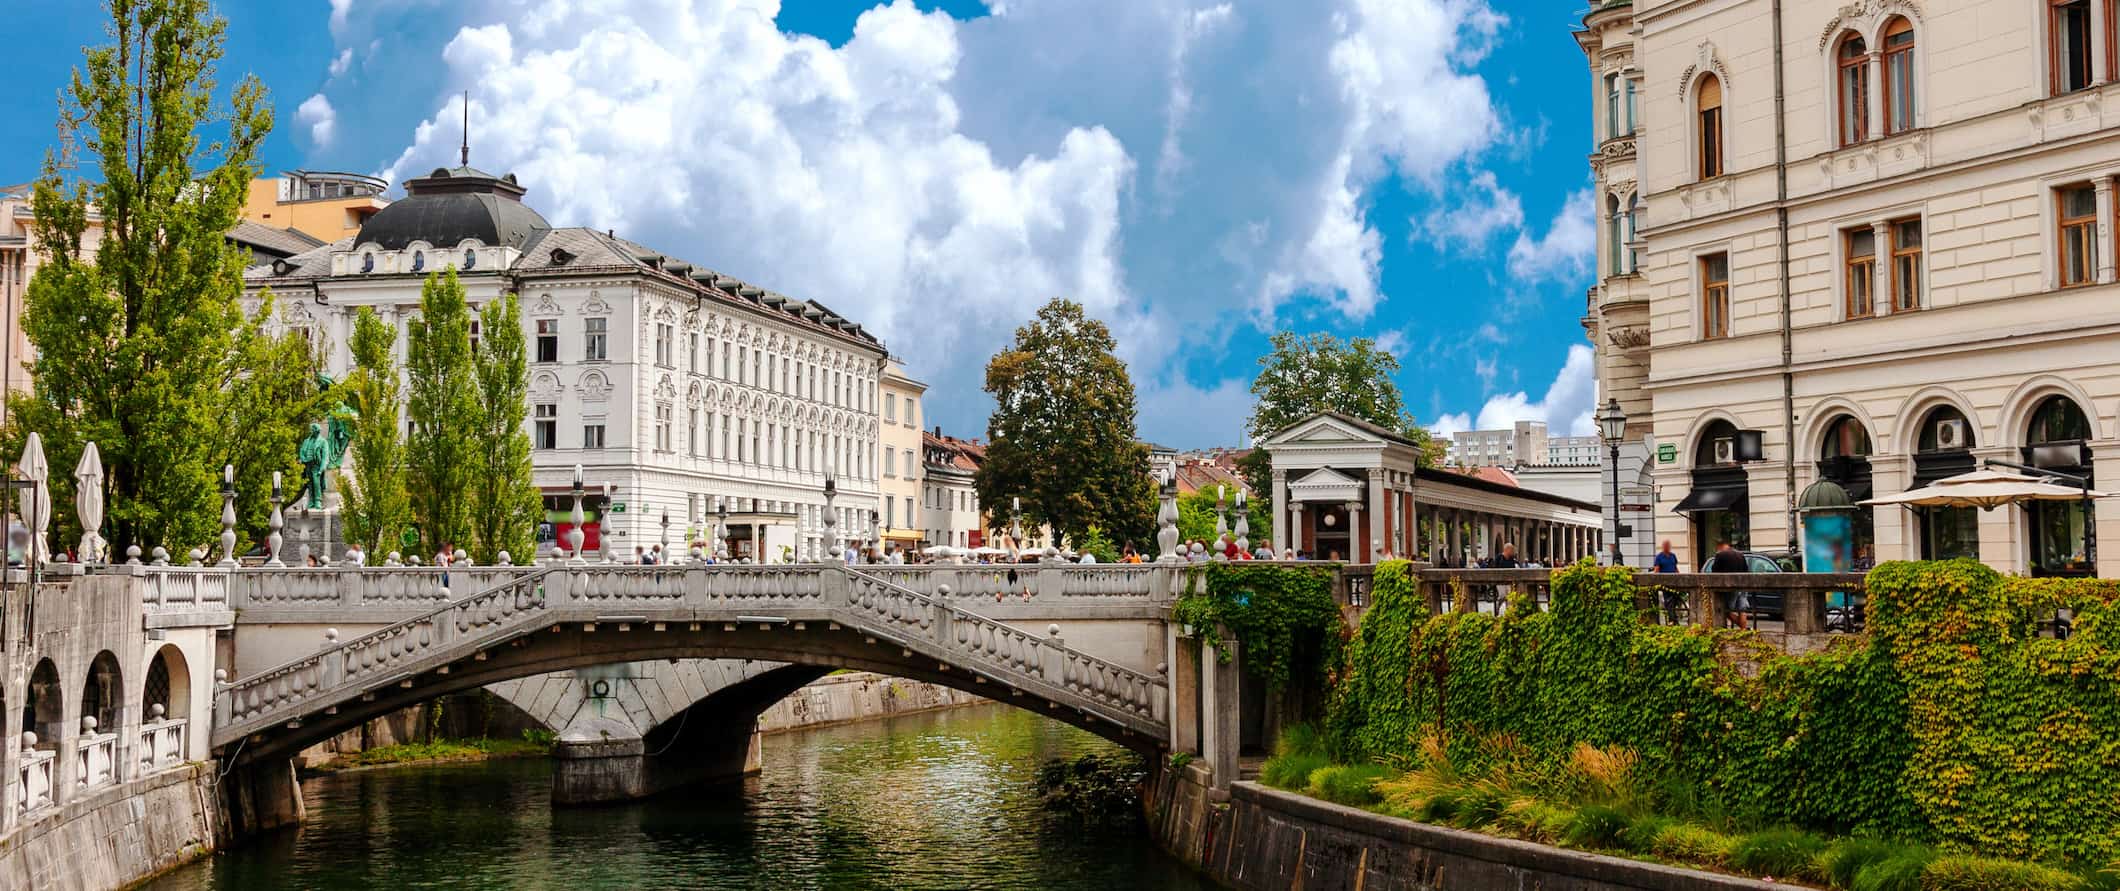 The historic buildings of Ljubljana along the canal in Slovenia on a sunny day